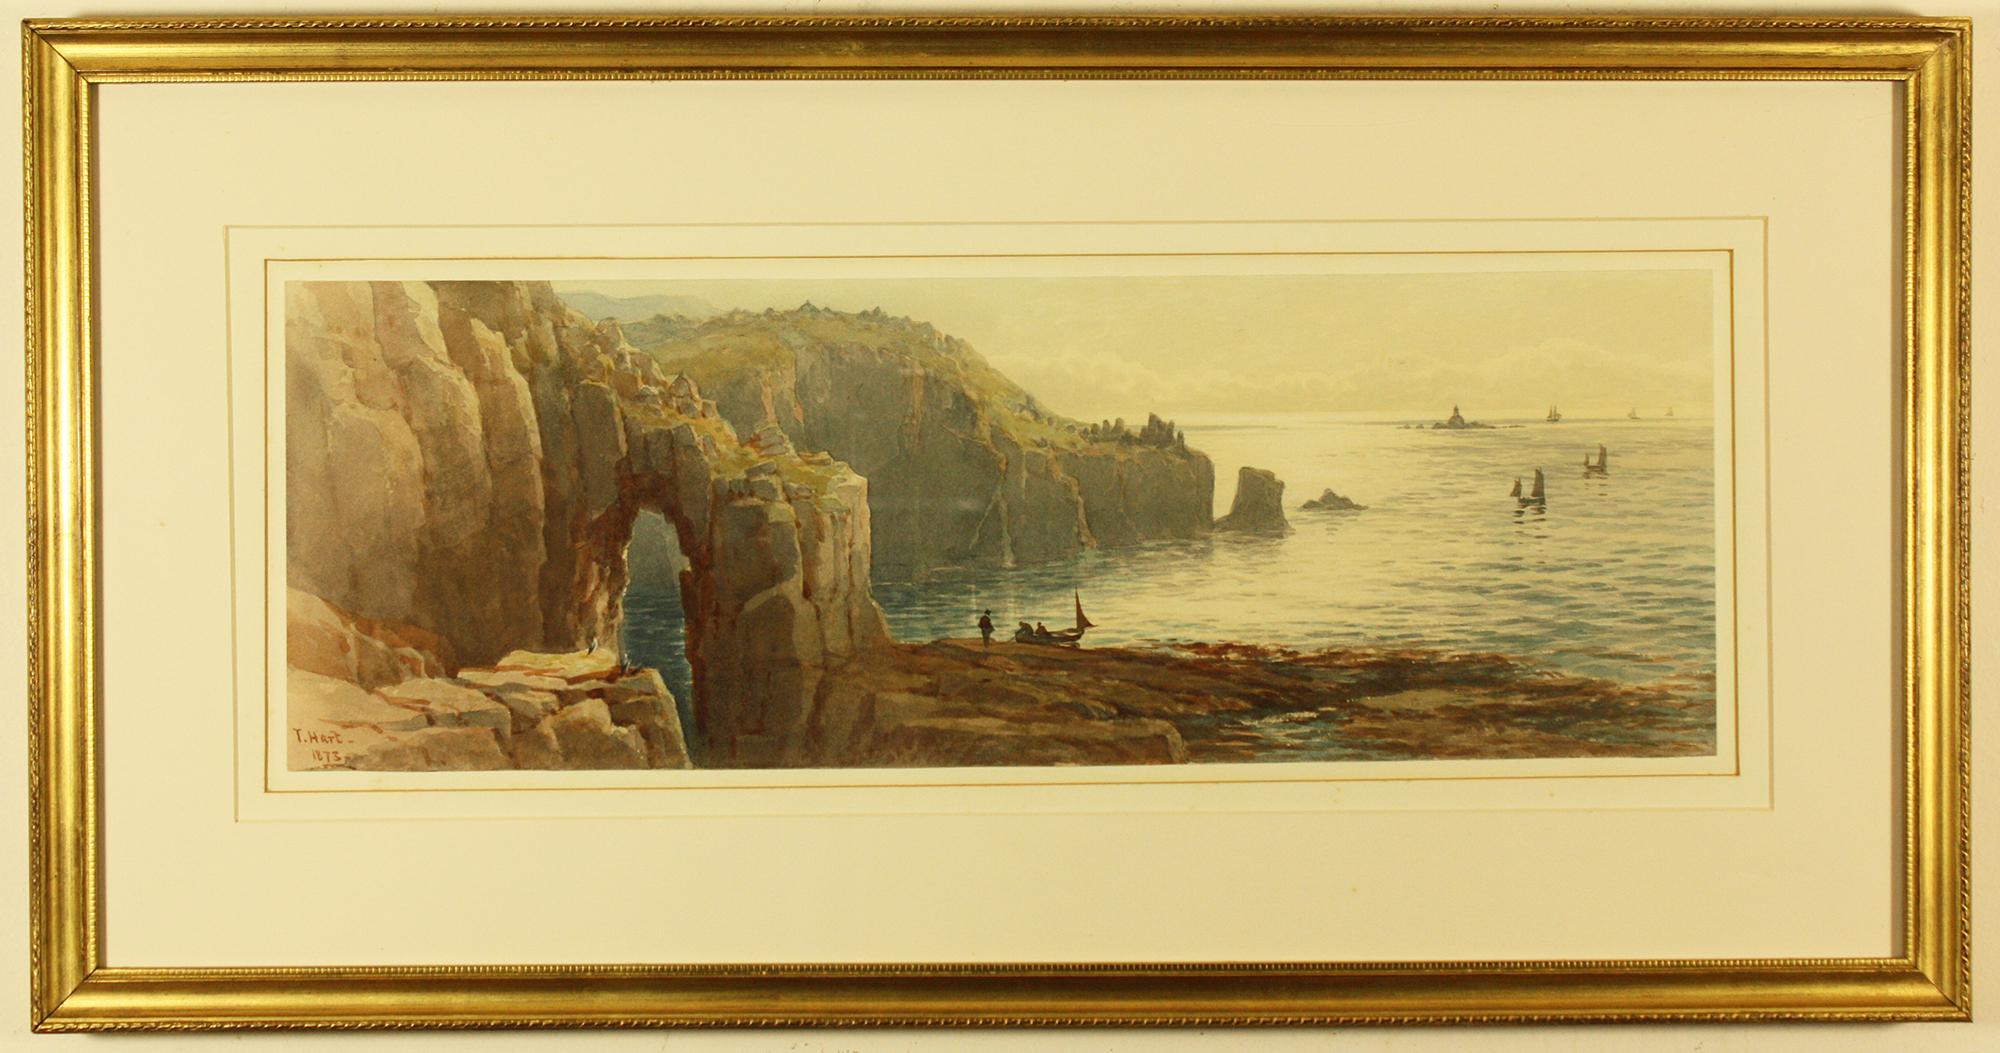 Gamper Arch and the Longships Light House by Thomas Hart FSA
Watercolour
Image Size  6.75 ins by 19.5 ins
Overall frame Size  14 ins by 26.75 ins

Thomas Hart 
Born 1830 Crowan Cornwall, Died 1916 The Lizard, Cornwall
Thomas was a prolific painter